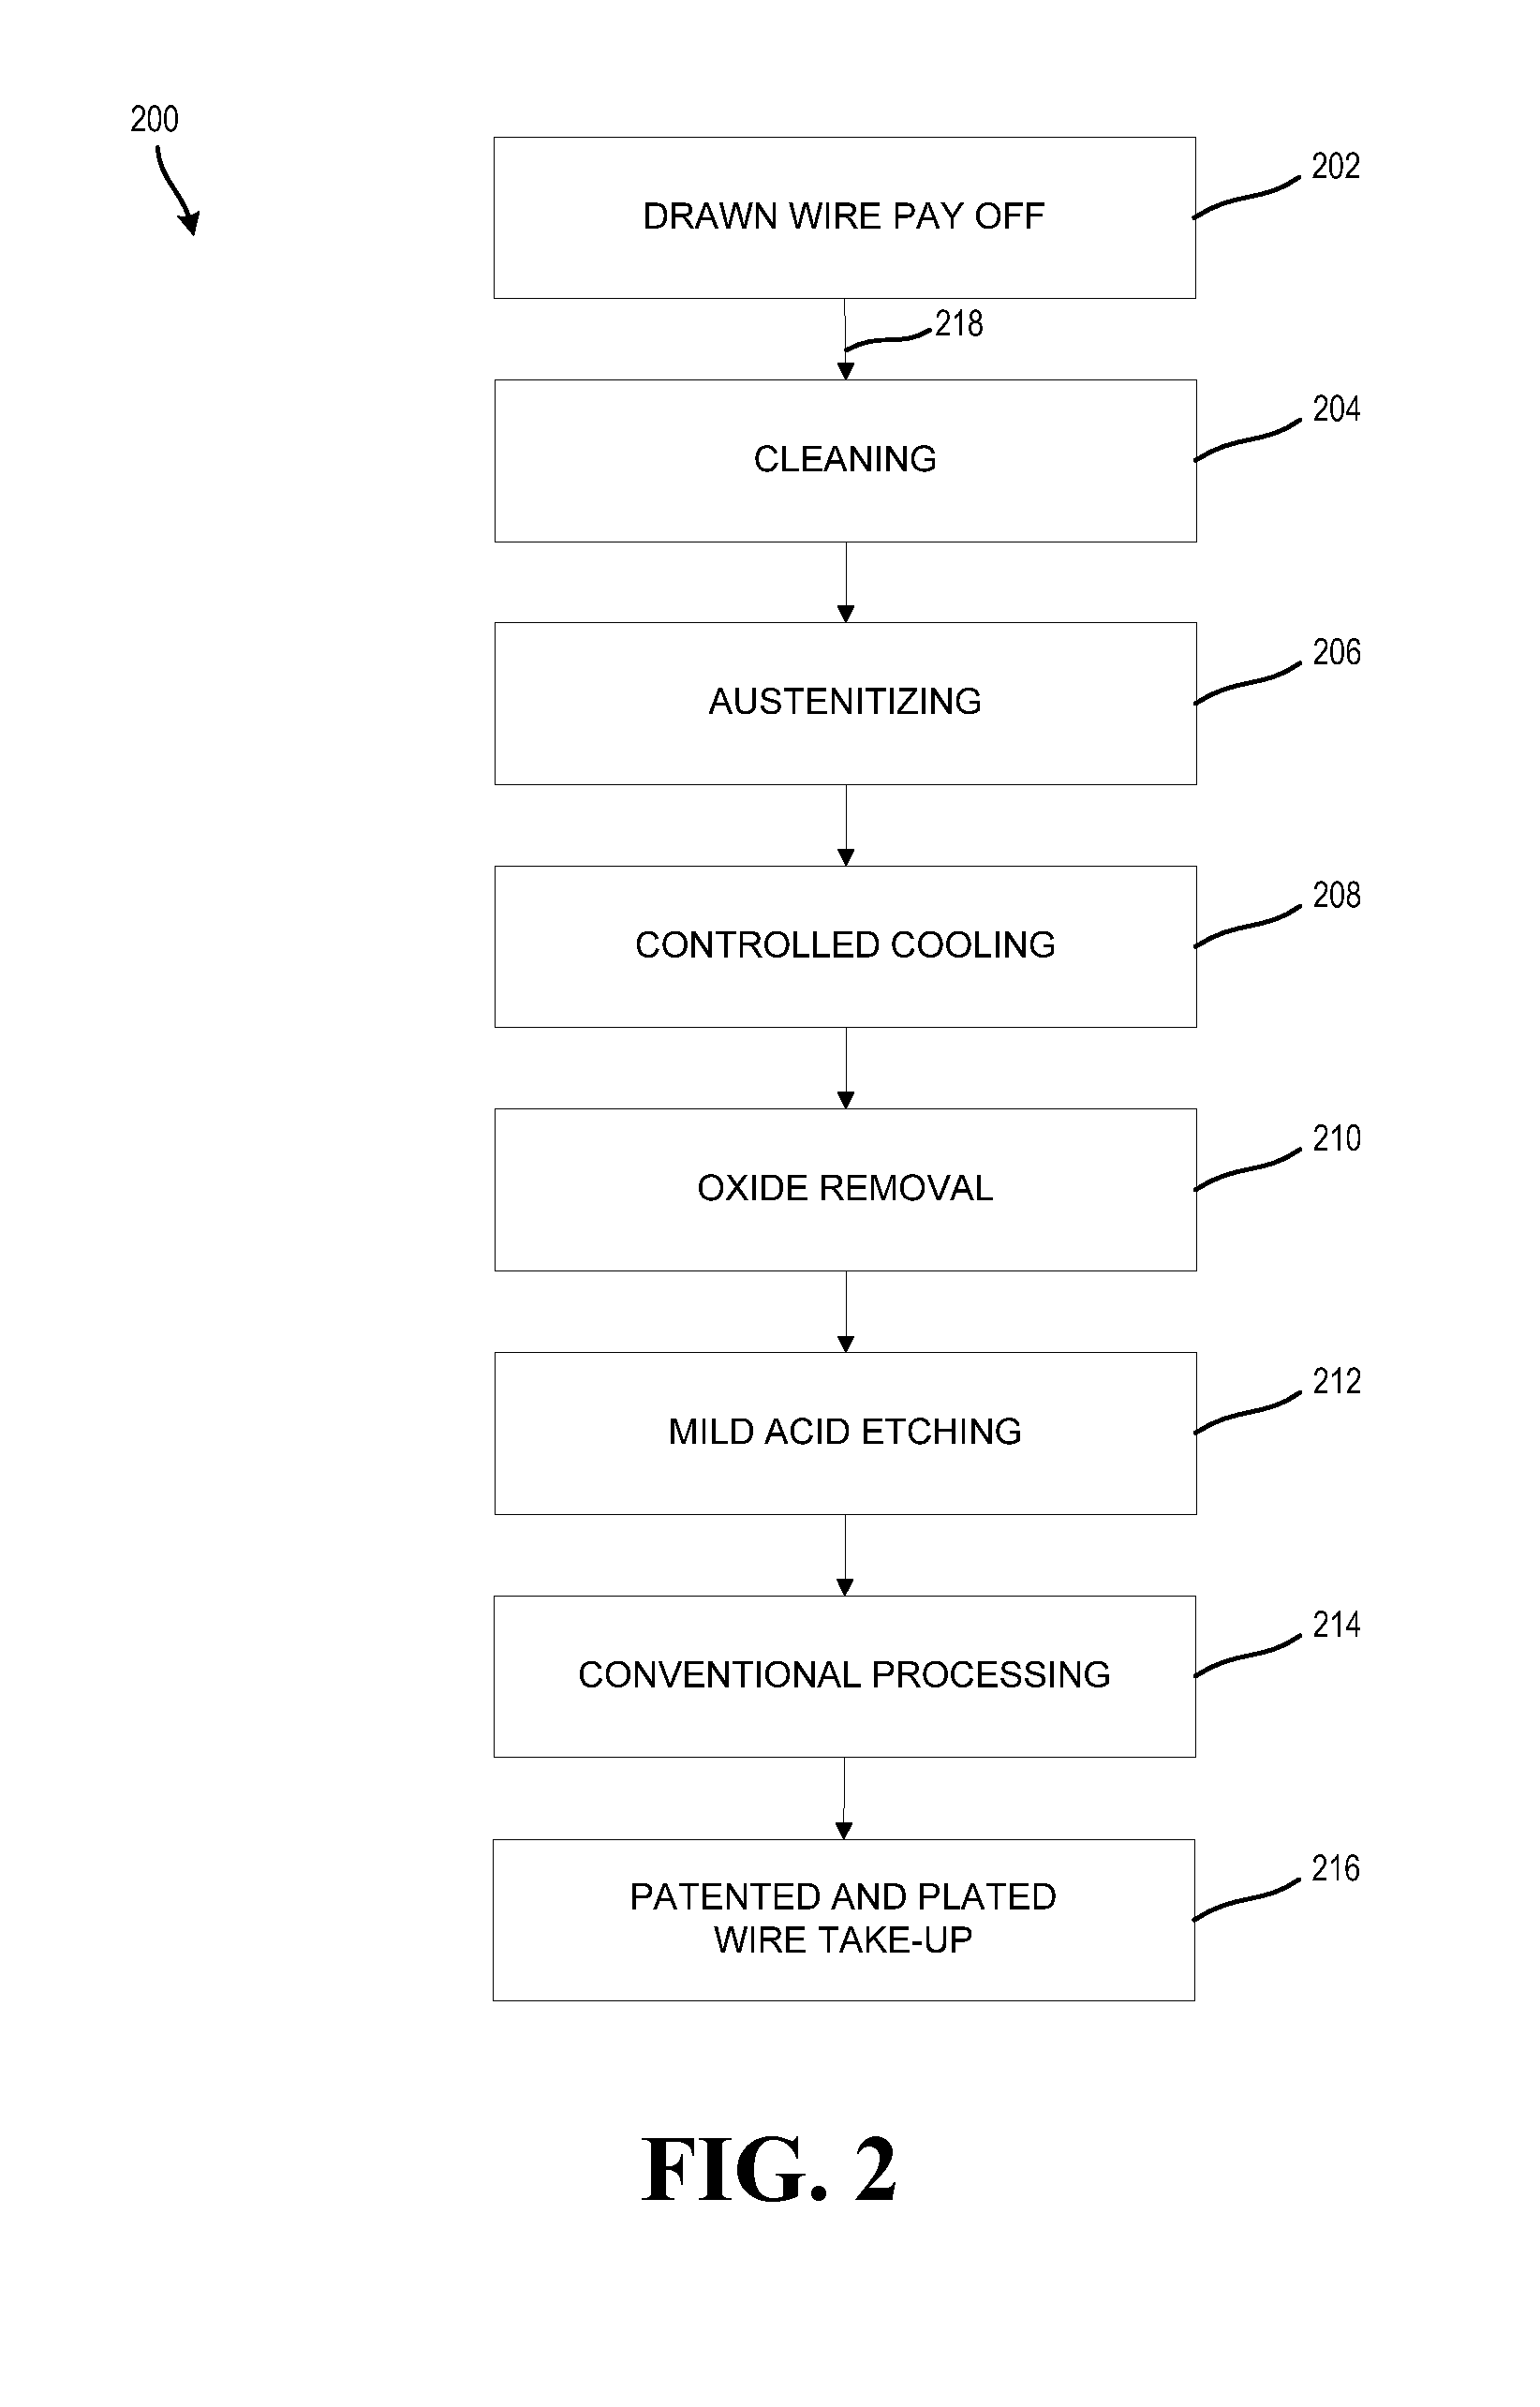 Methods and Systems for Preventing Iron Oxide Formulation and Decarburization During Steel Tempering